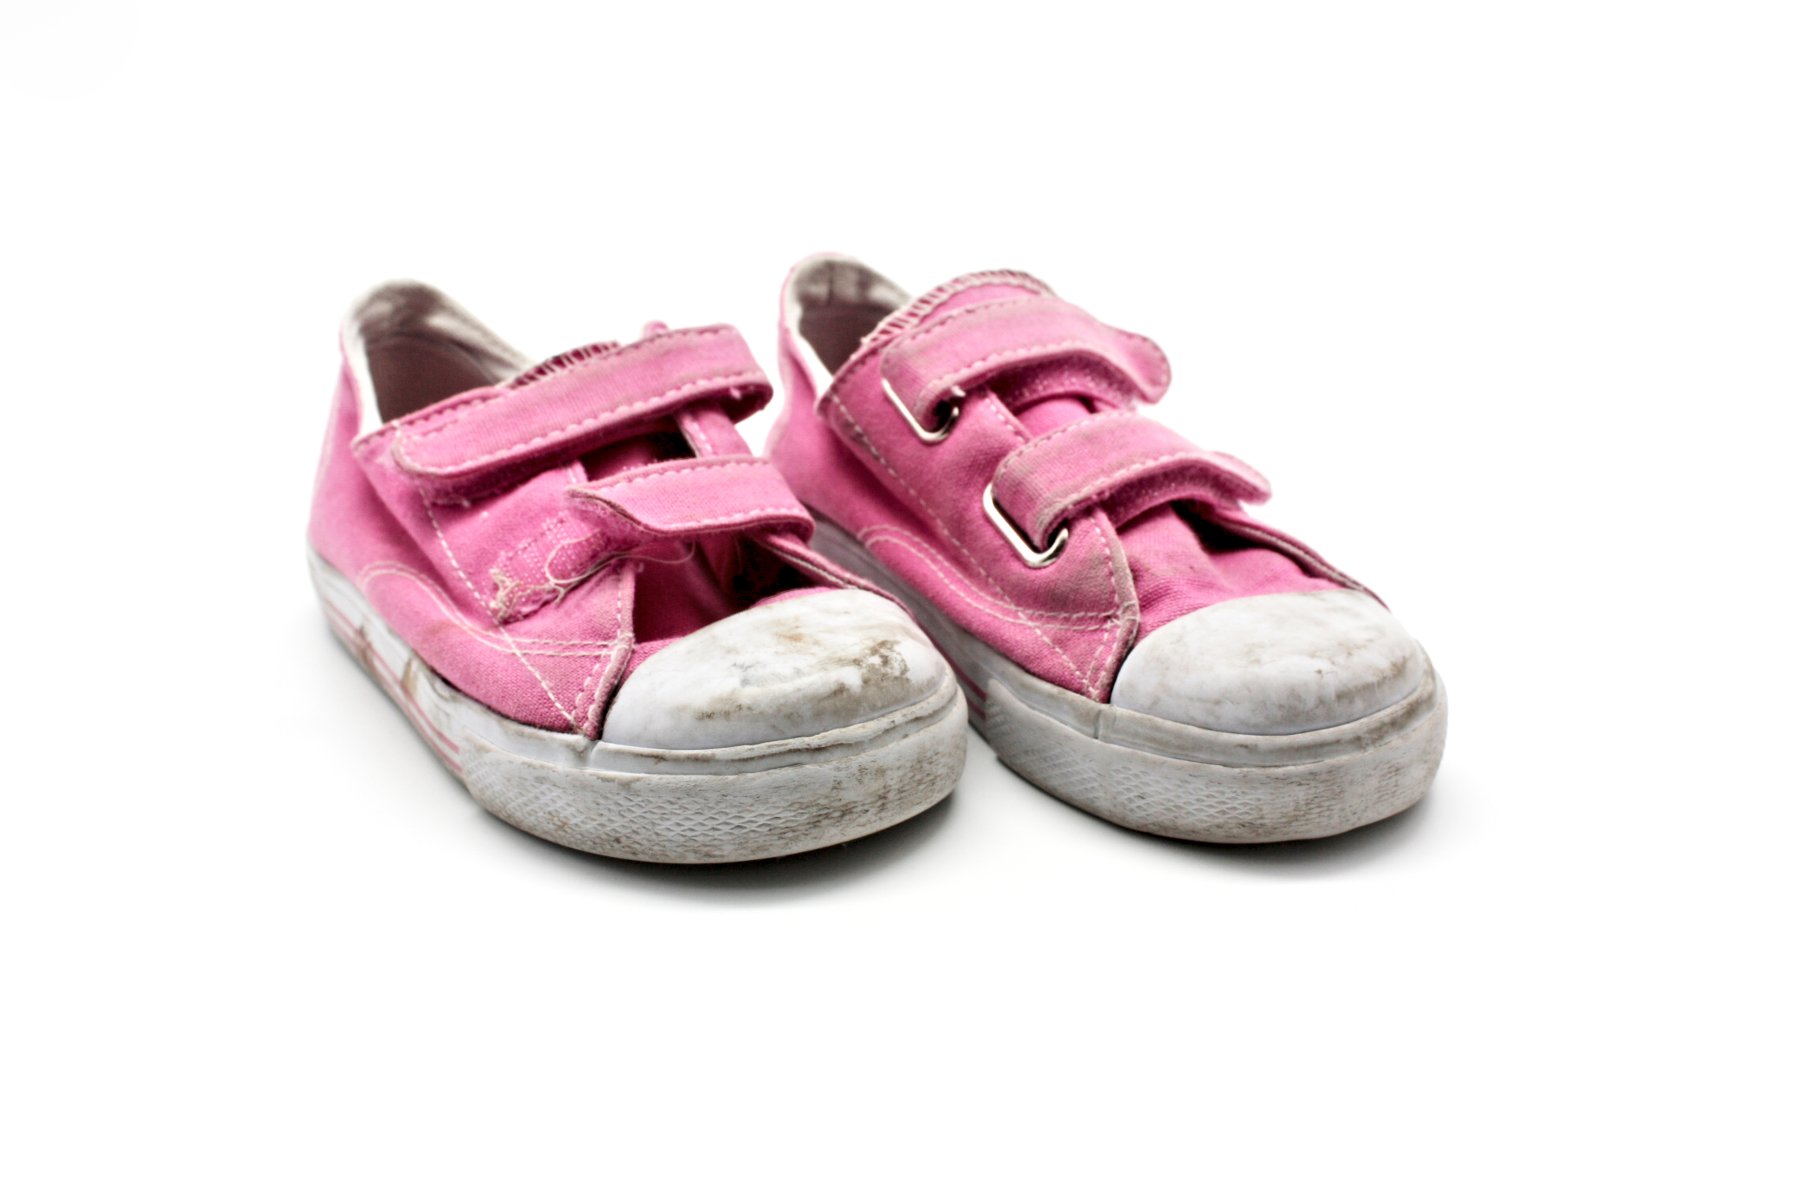 Old pink sneakers, Baby, Sneaker, New, Old, HQ Photo